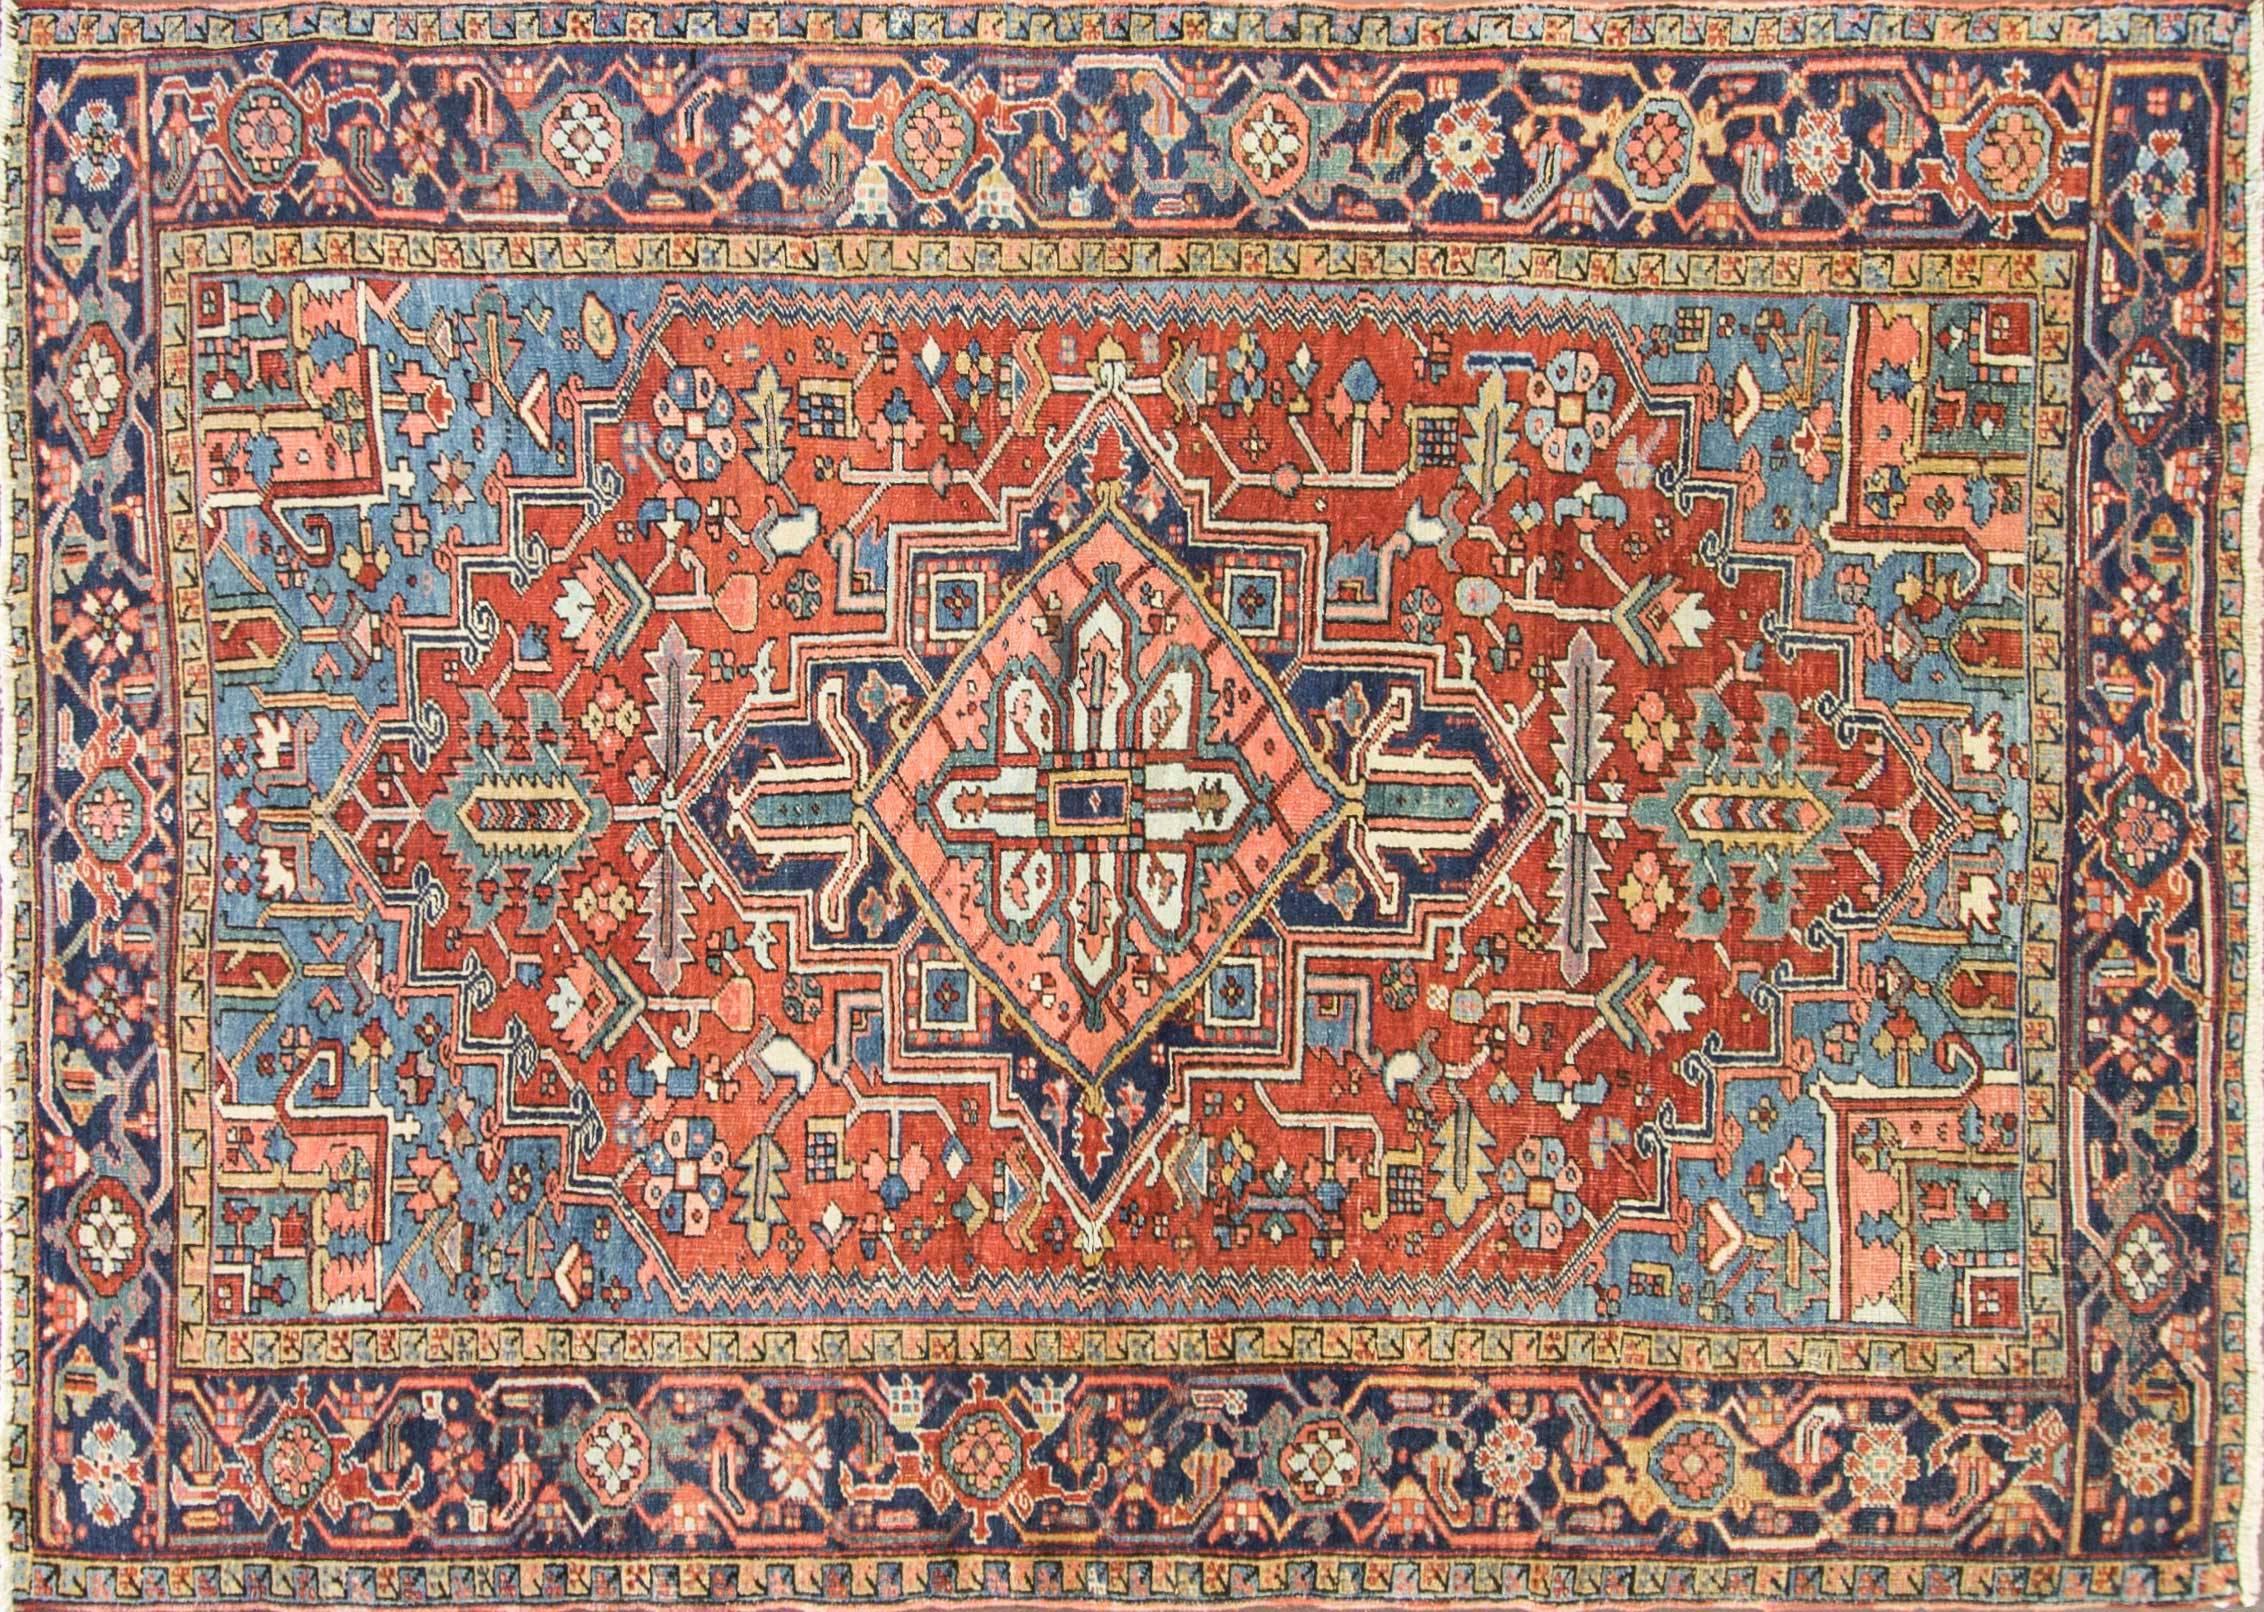 Antique Persian Heriz rug, Persia, circa 1920. This remarkable and artistic antique rug, showcases an ornate, multicolored central design. At the heart of the antique Persian Heriz Serapi rug, a many-petaled flower is surrounded by a 12-pointed